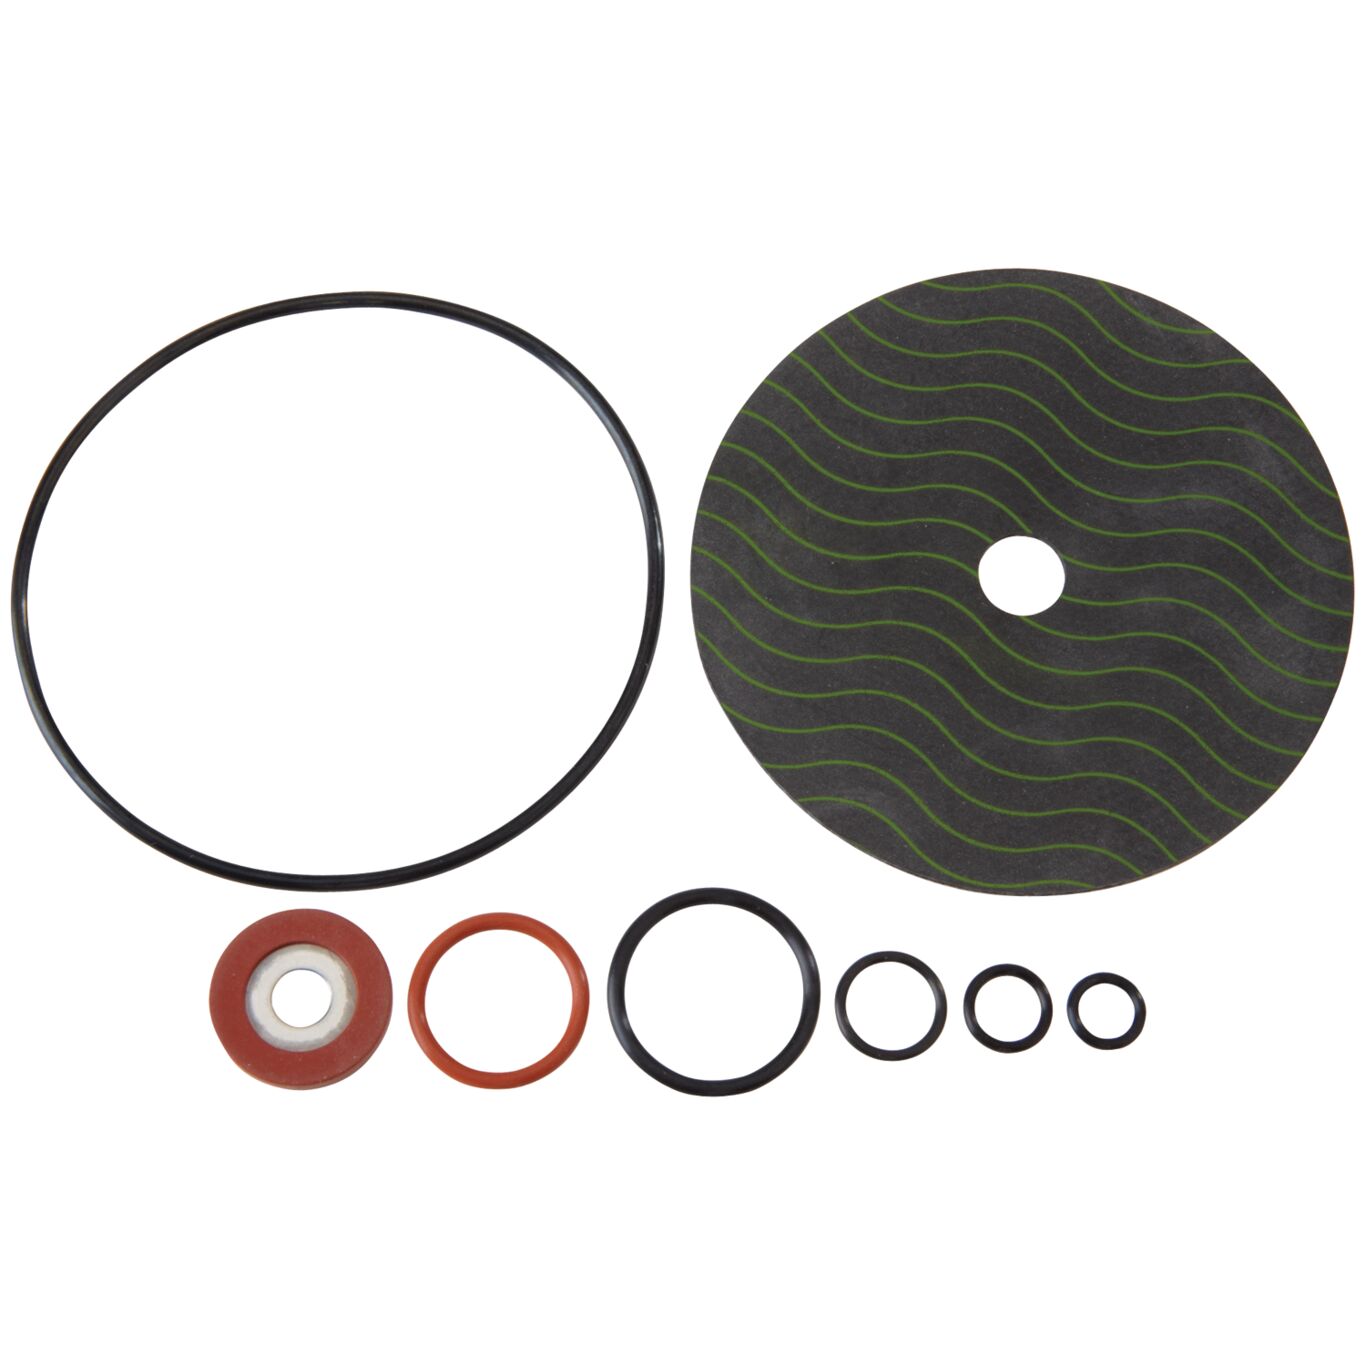 Watts 2 1/2" 3" Rubber Total Repair Kit for the 709 Device 0887915 887915